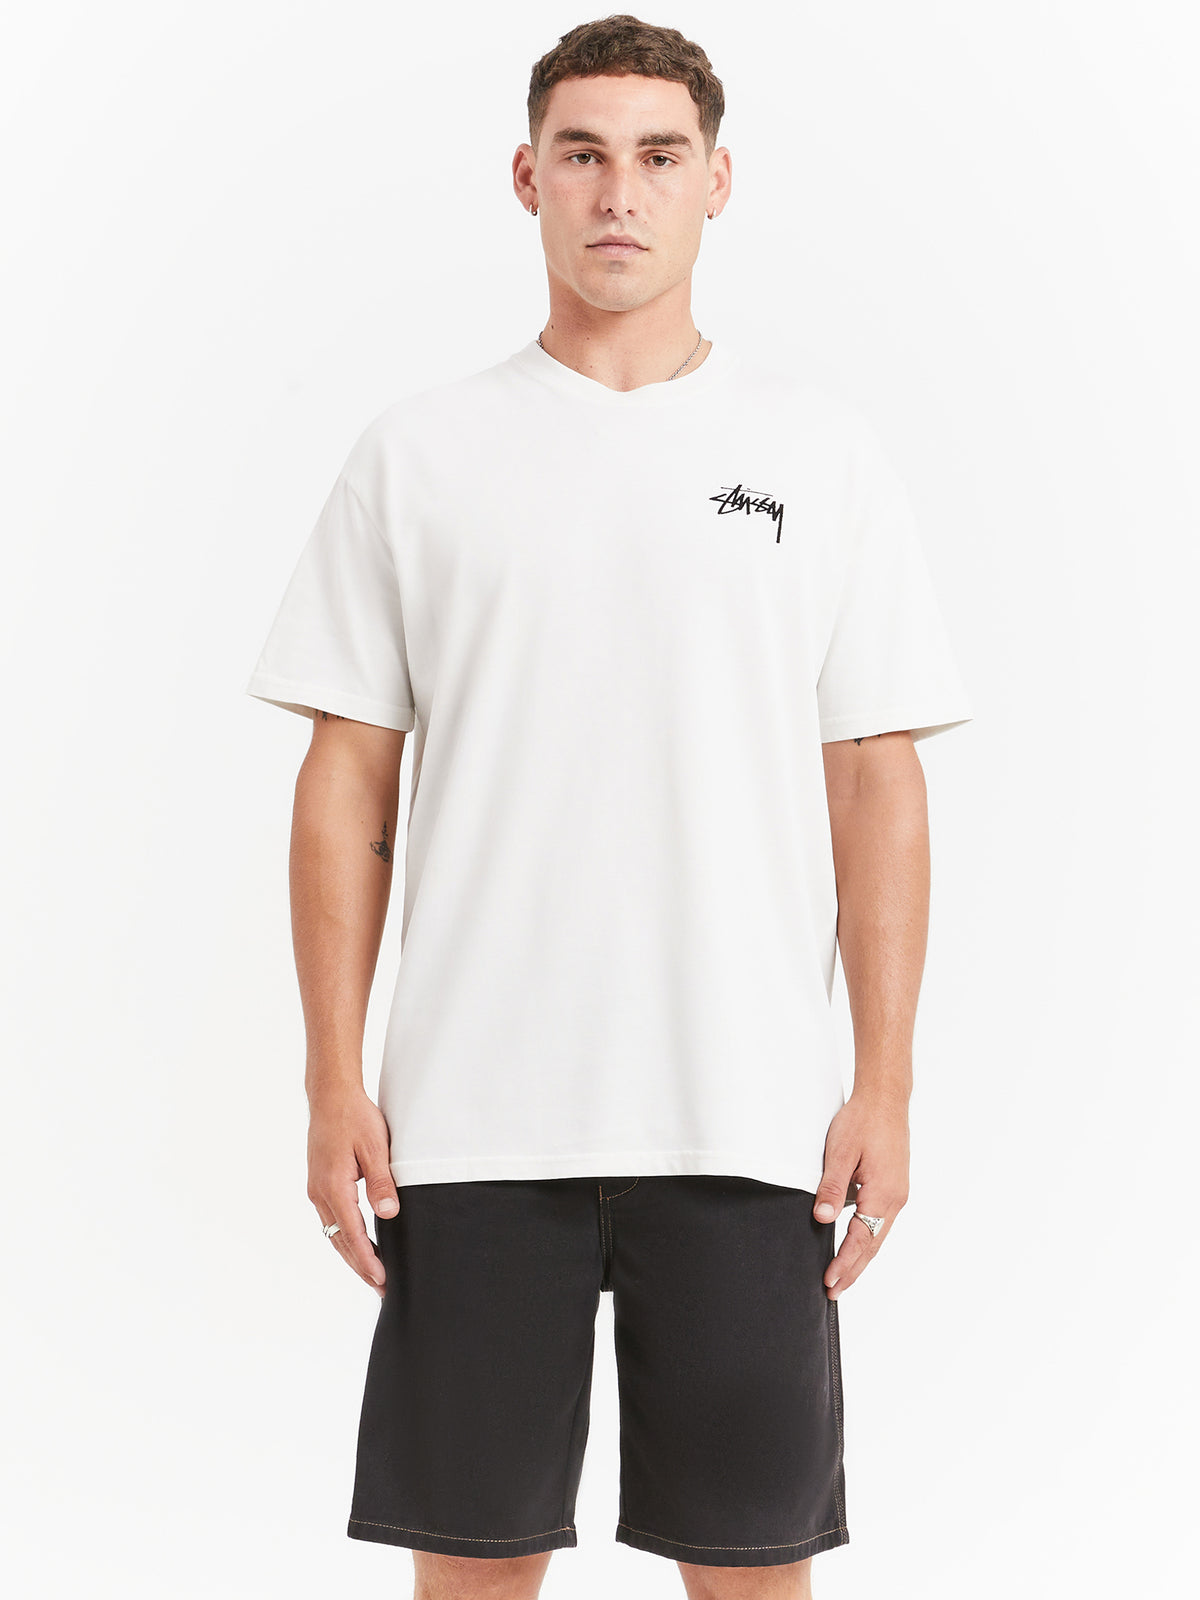 House Of Cards Heavyweight T-Shirt in Pigment White